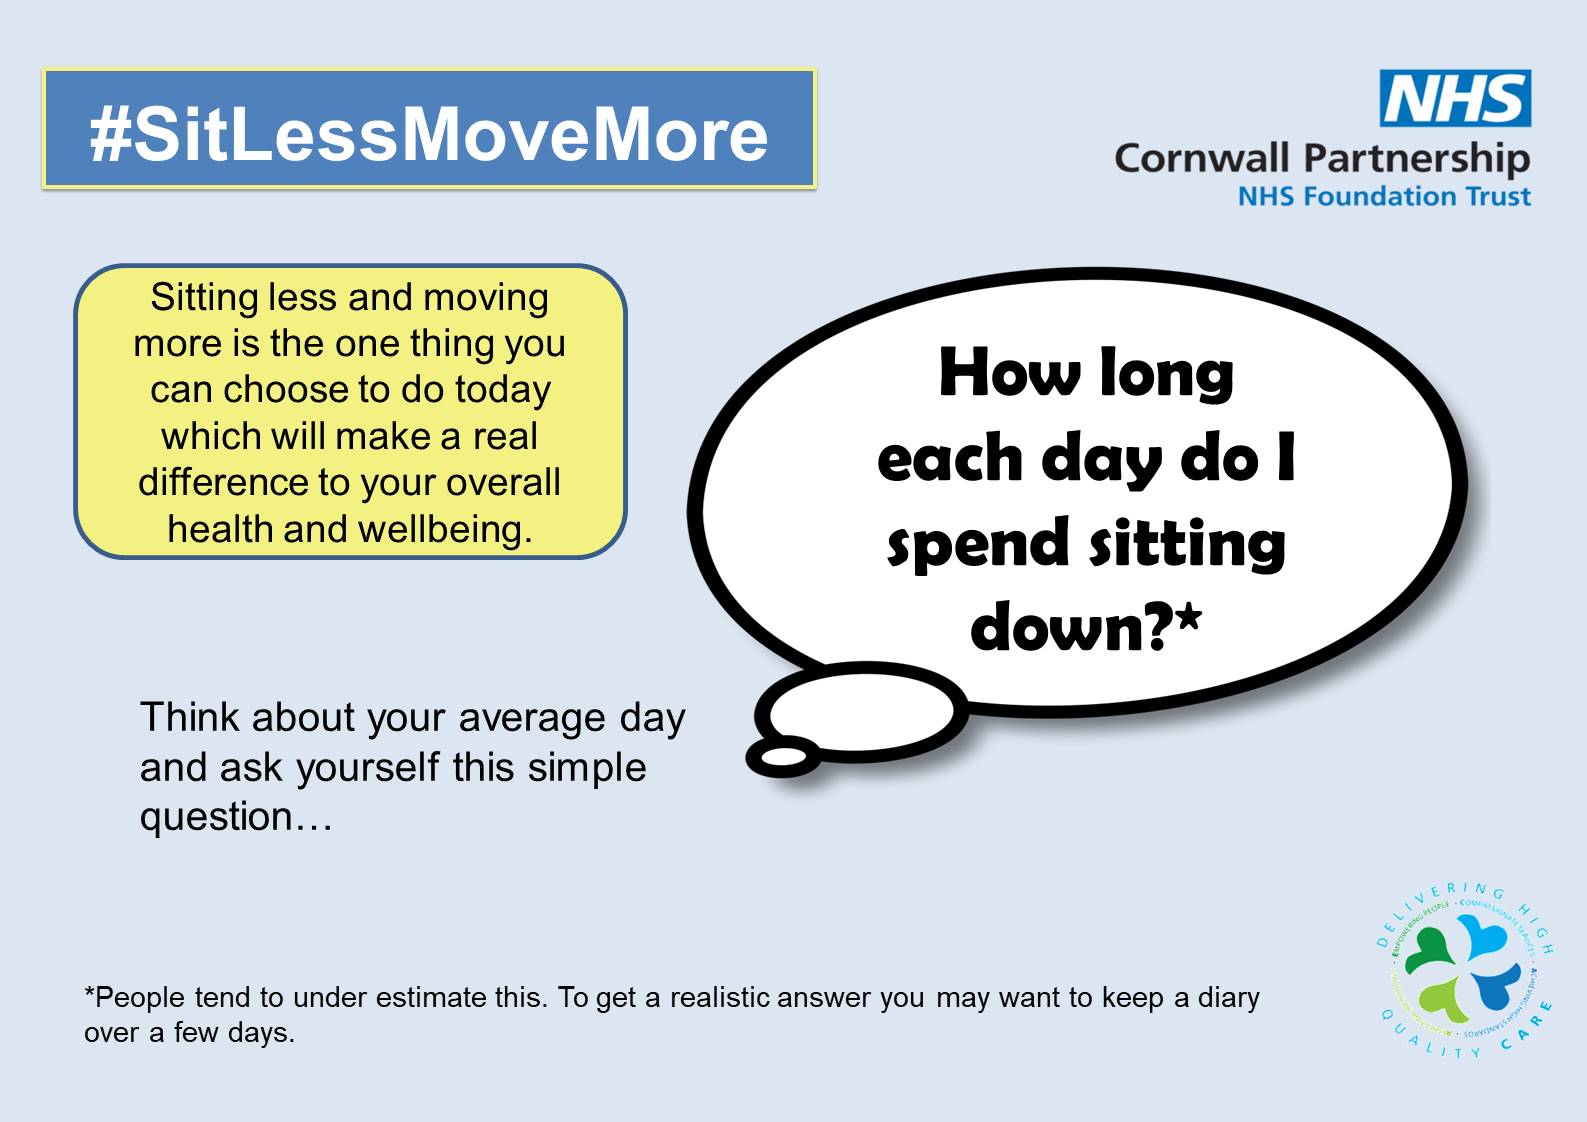 Move more and sit less